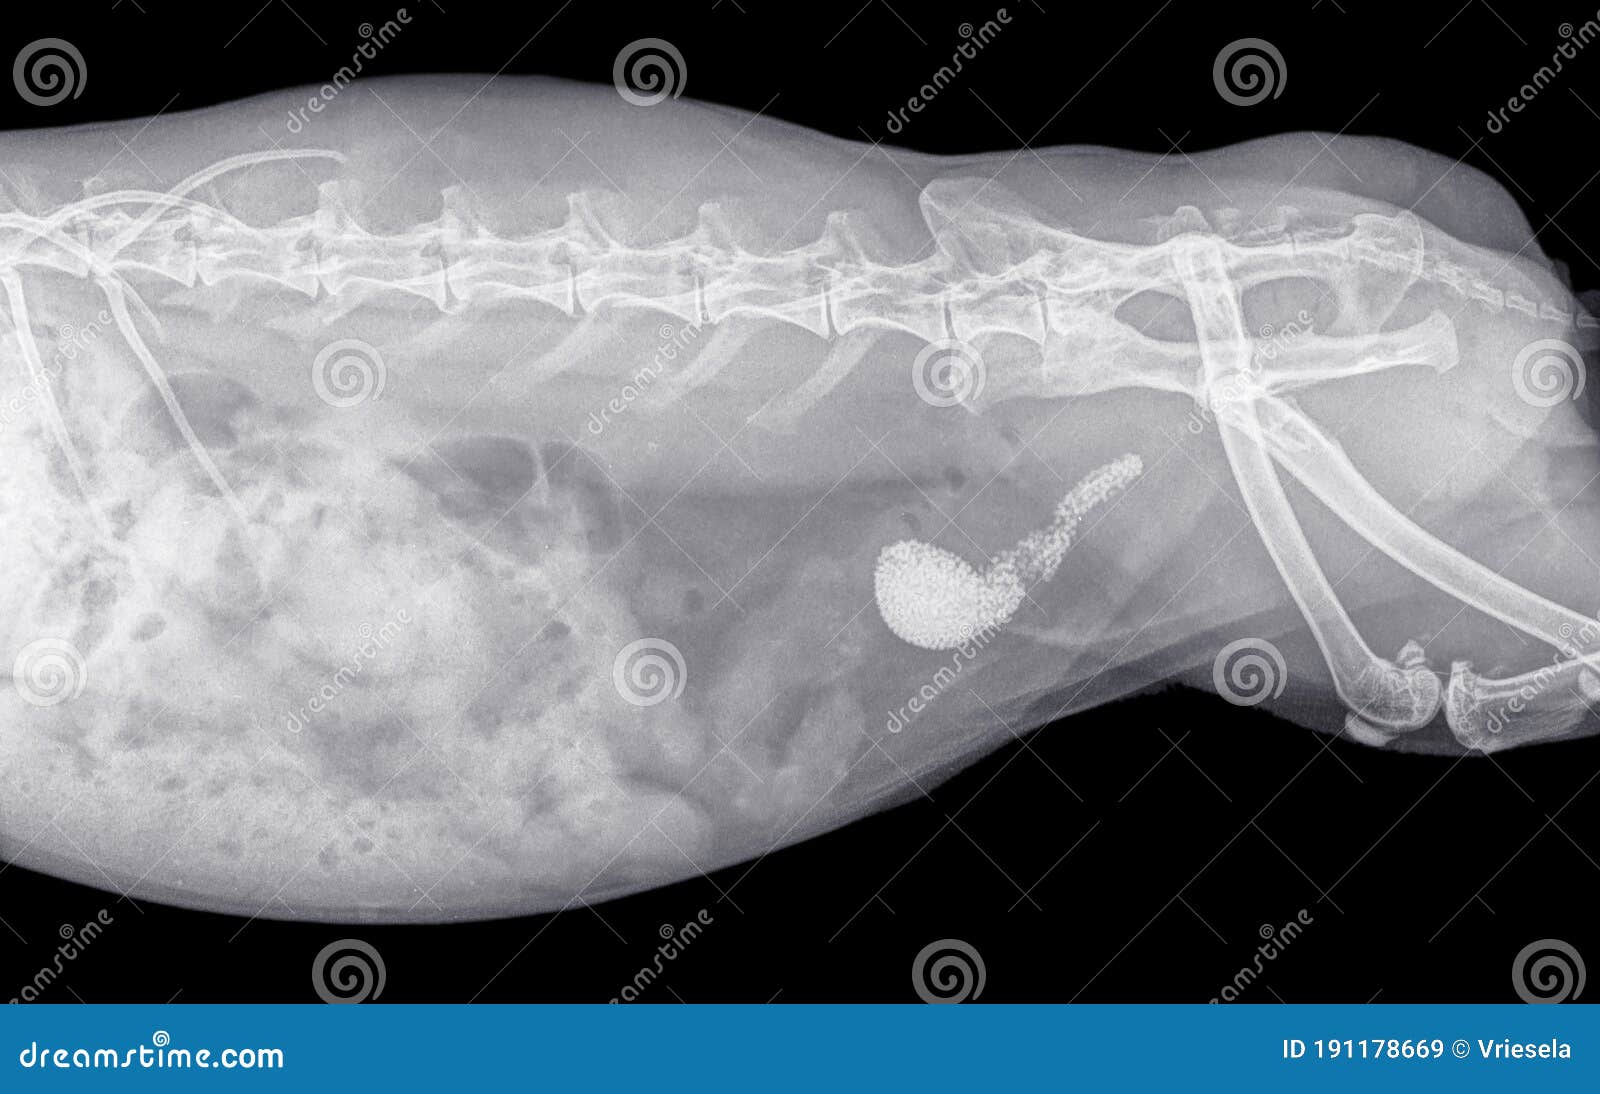 Xray Of The Abdomen Of A Rabbit With Stones In The Bladder And Urethra